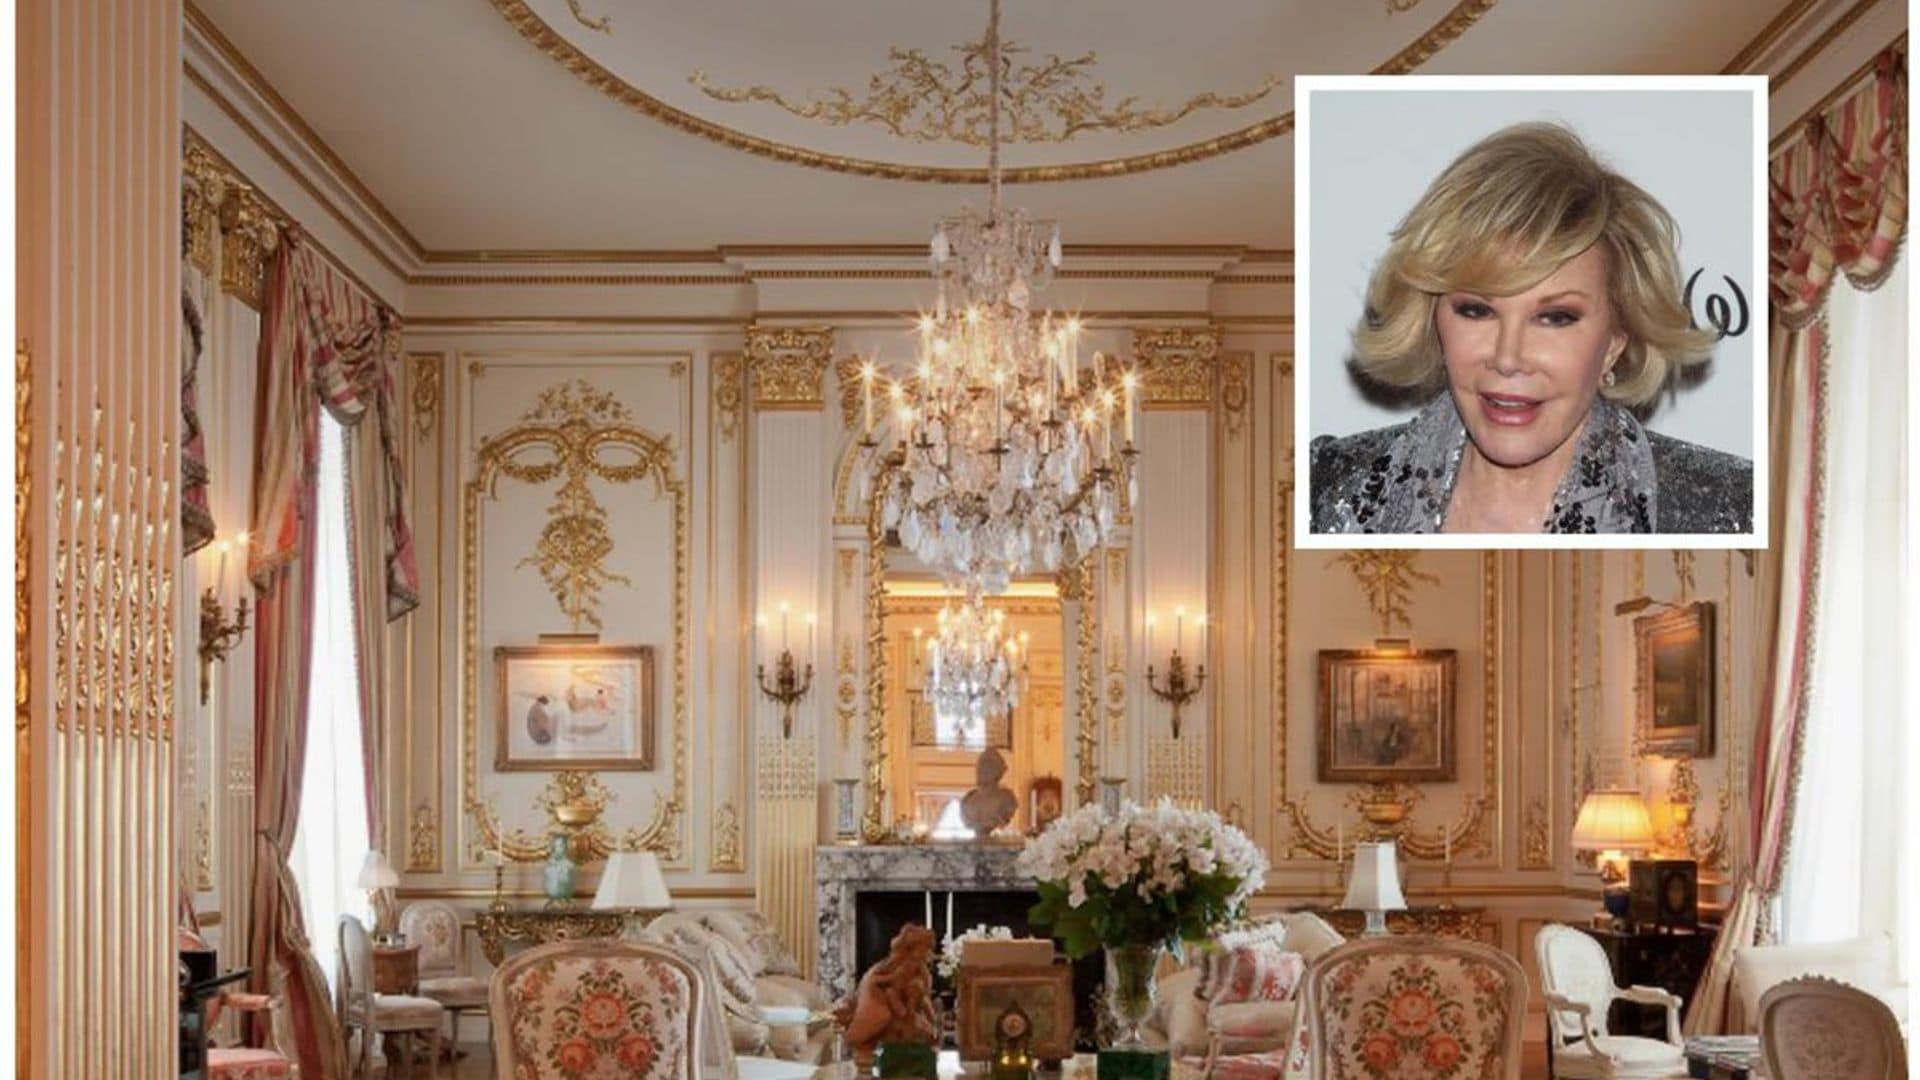 Joan Rivers’ ‘haunted’ New York penthouse is back on the market